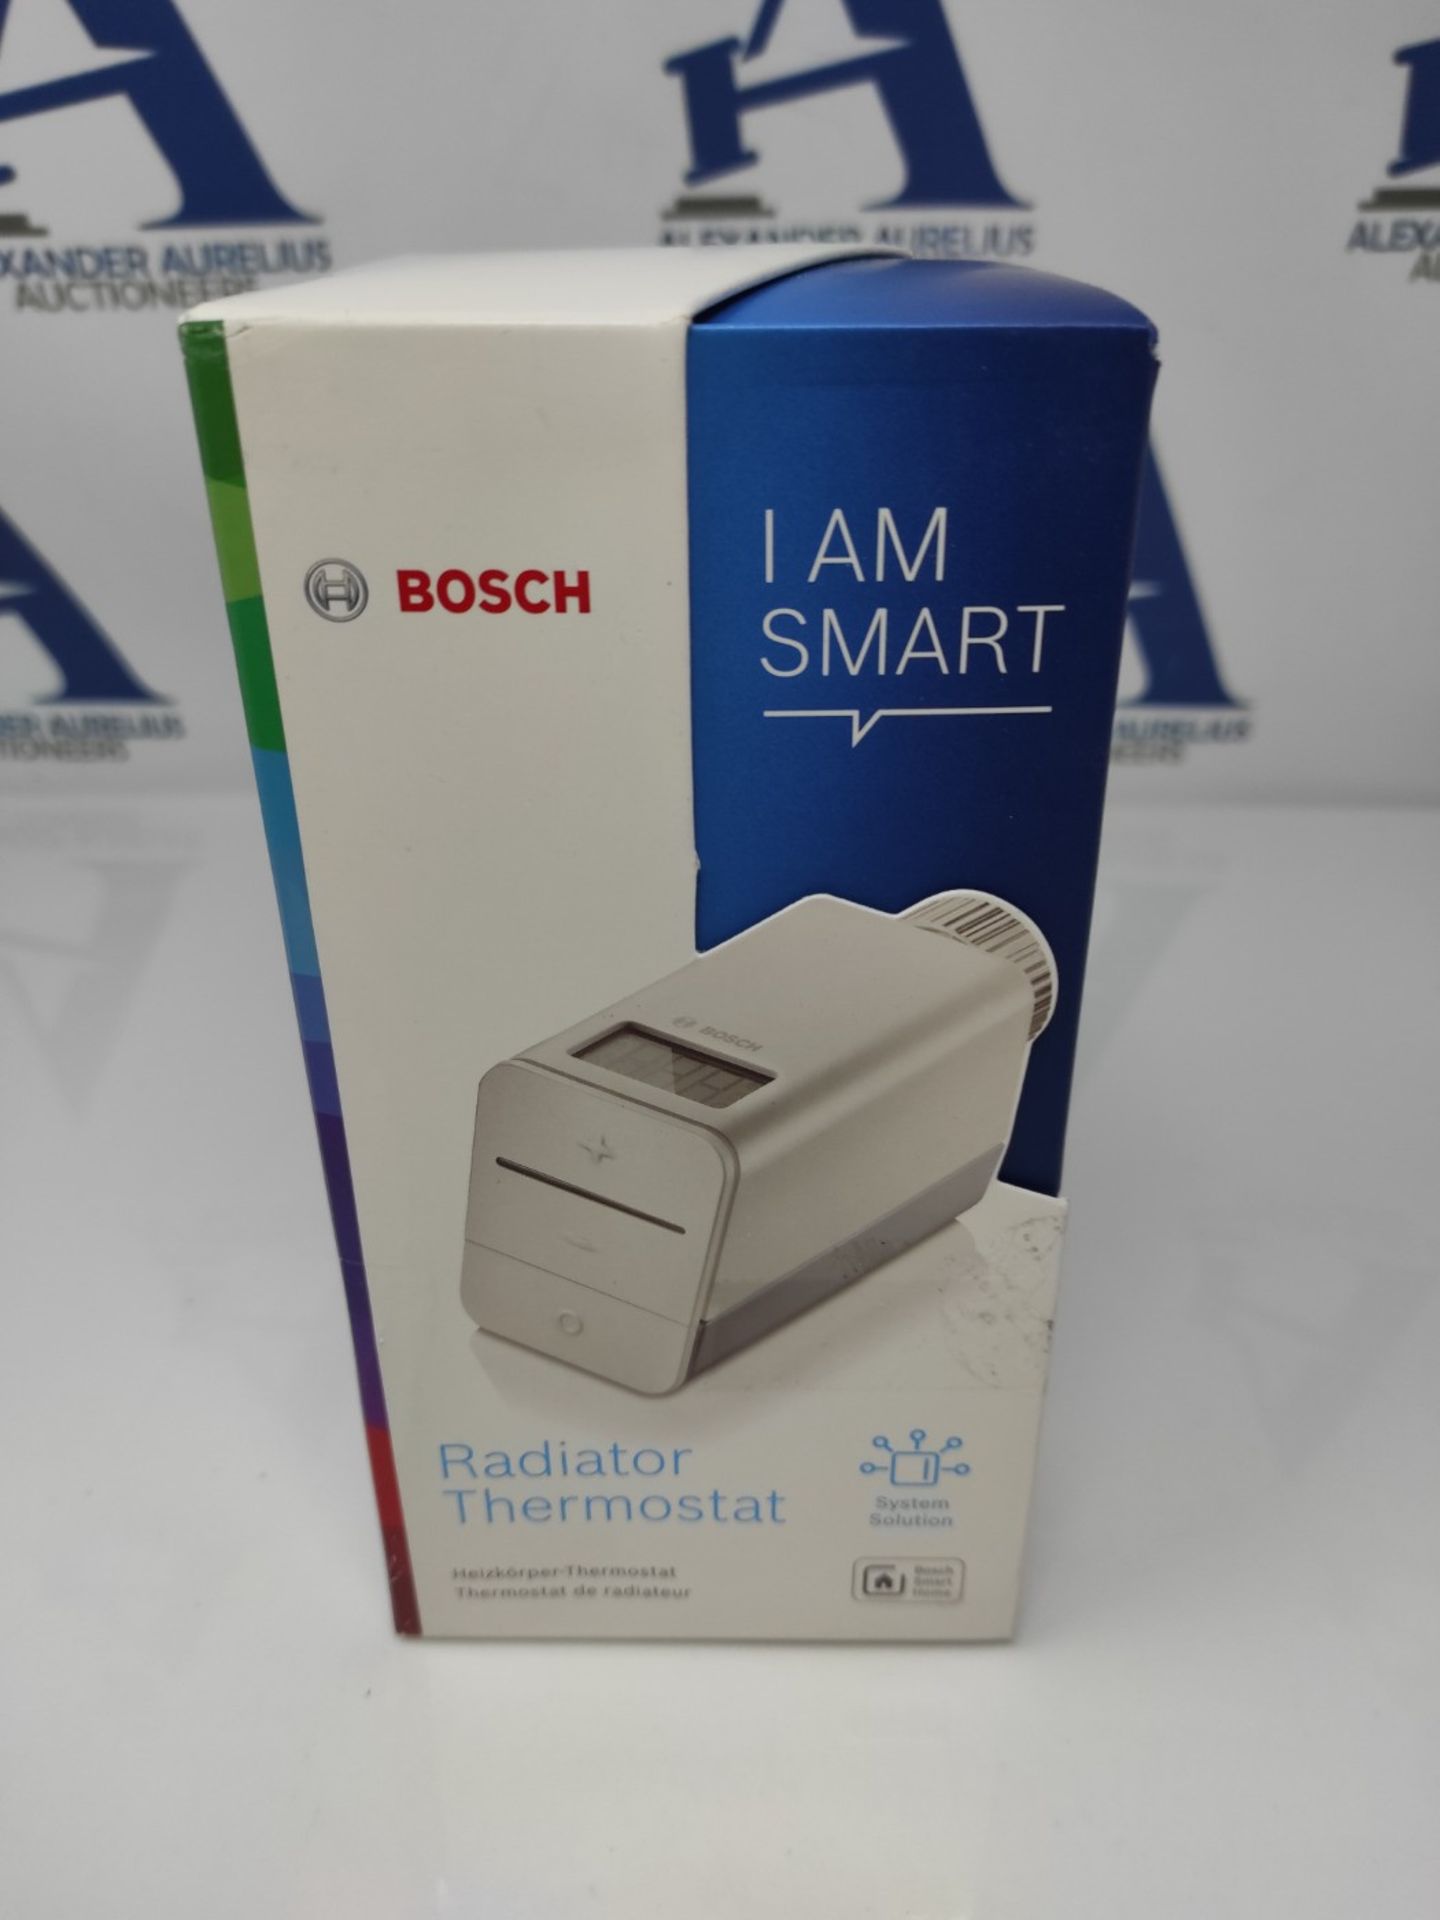 RRP £70.00 Bosch Smart Home Radiator Thermostat, Heating Thermostat with App Function, compatible - Image 2 of 3